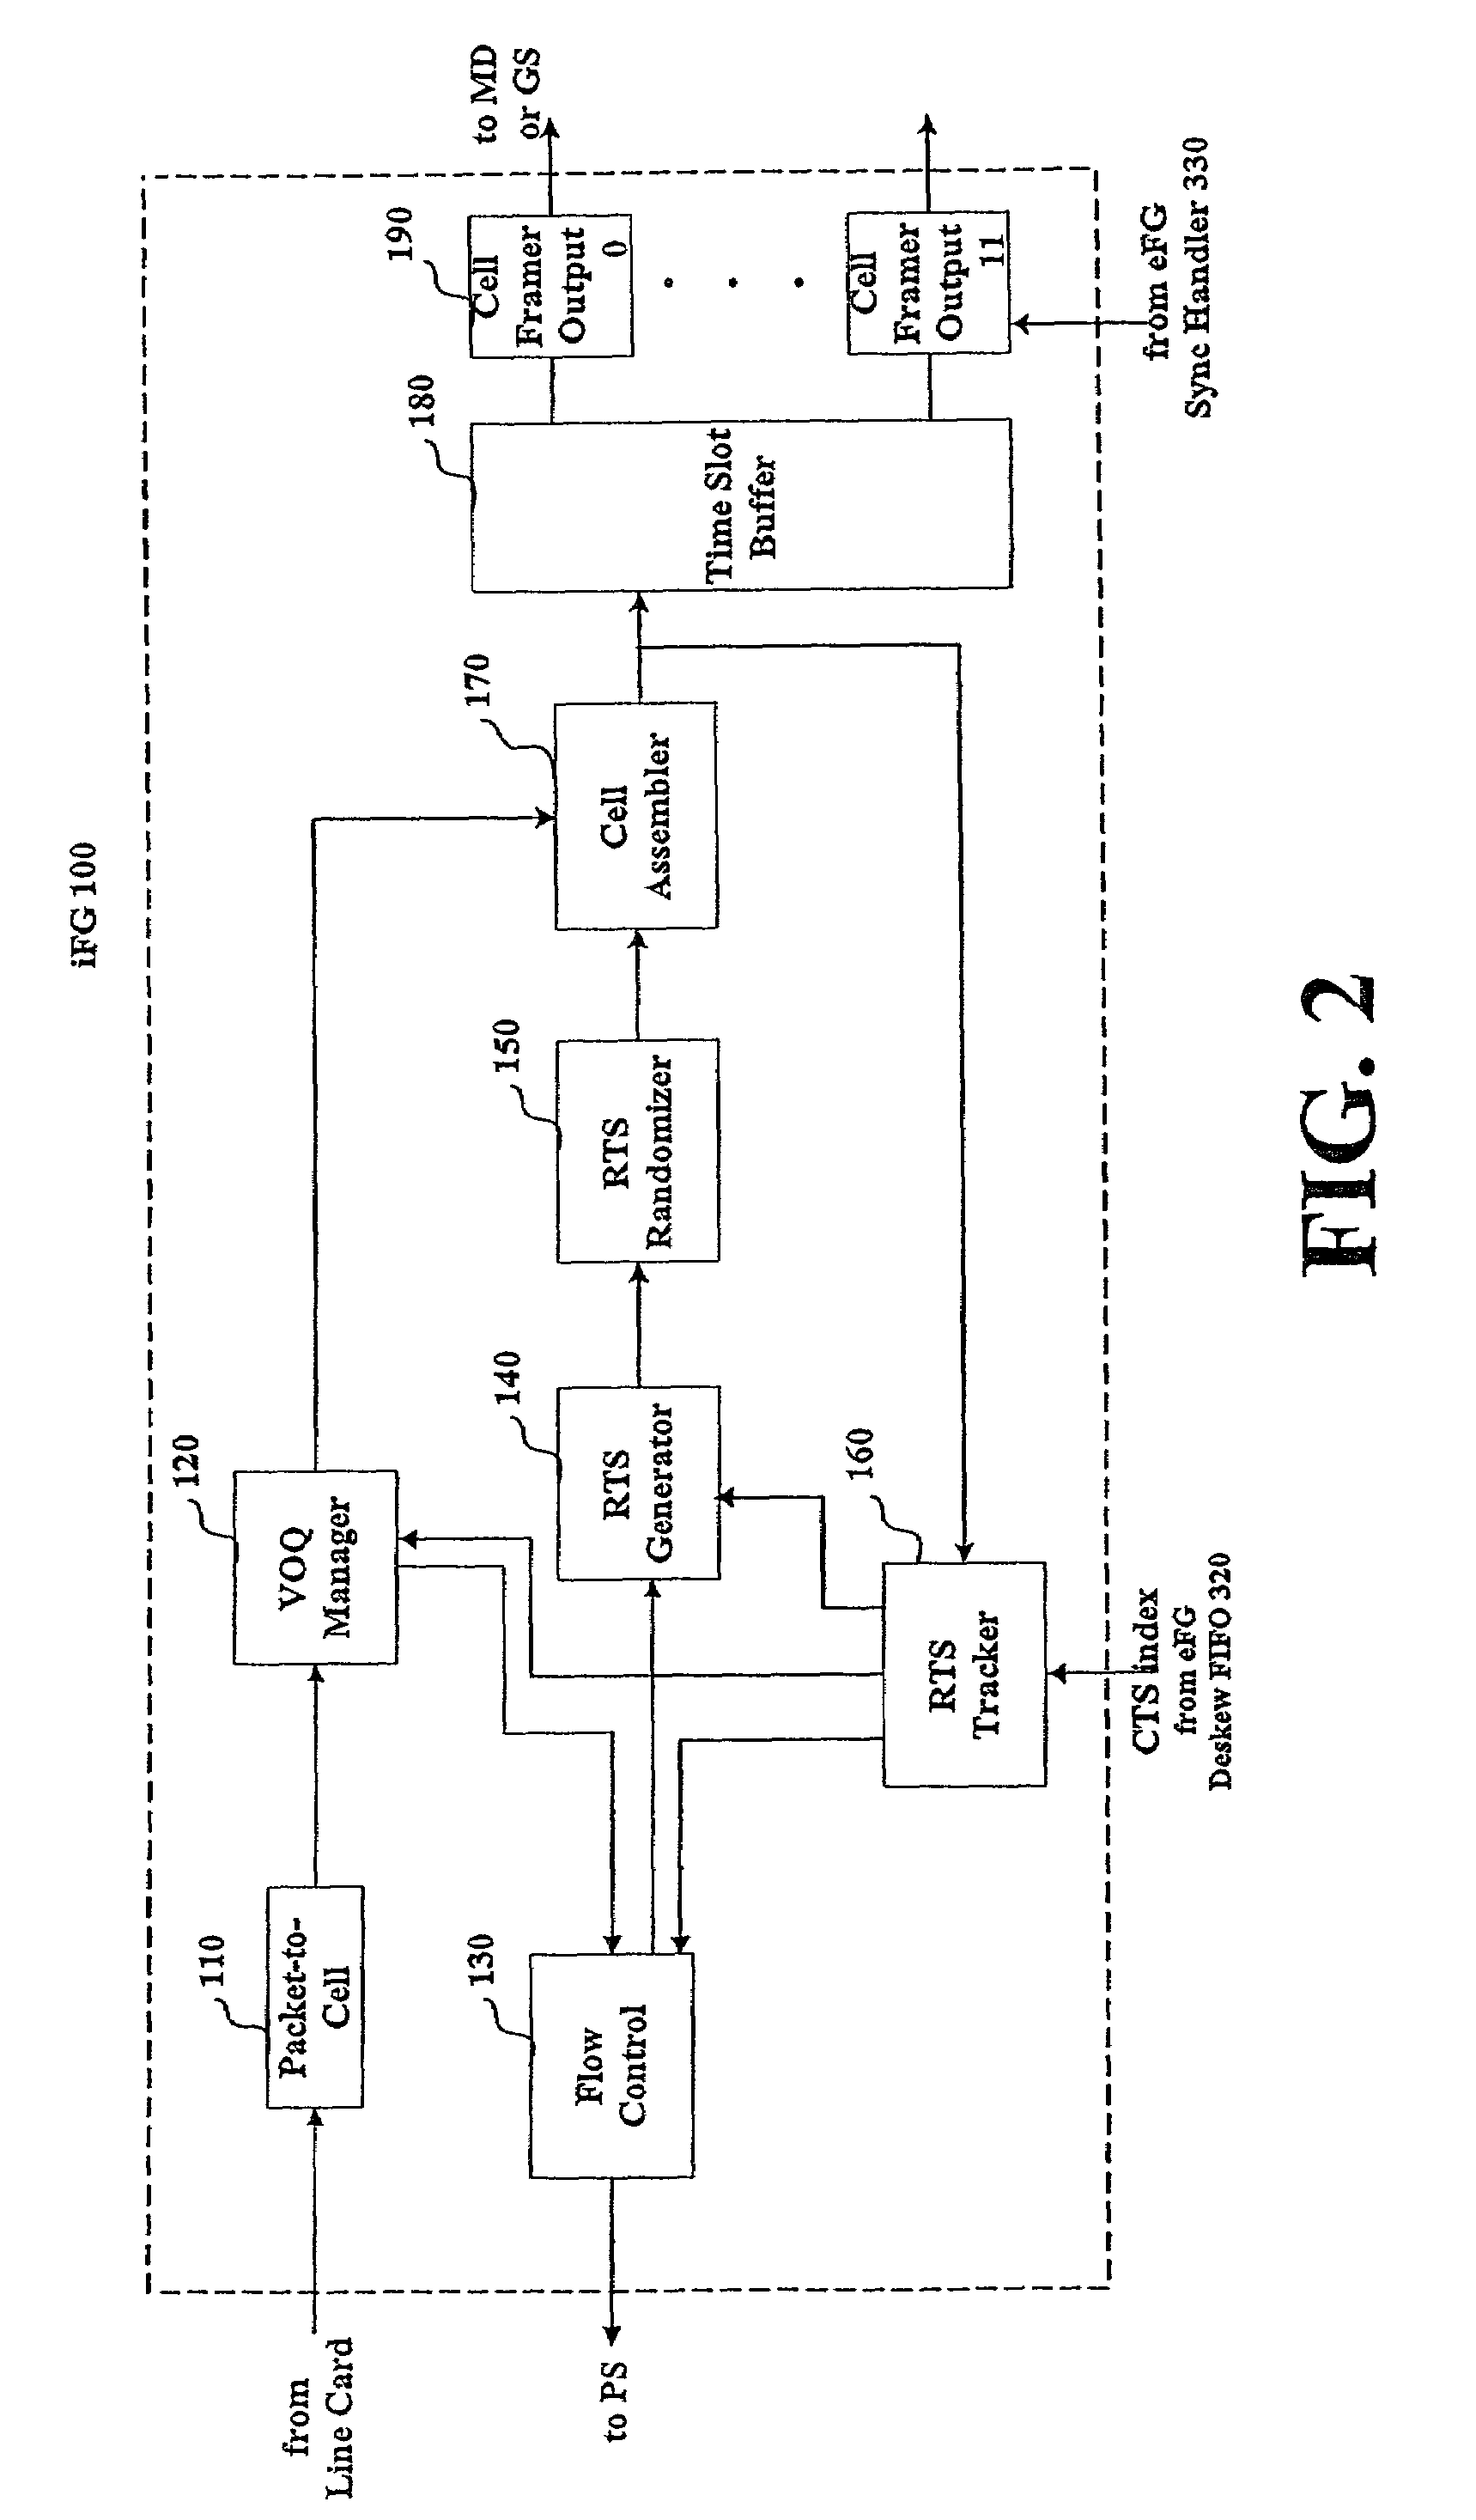 Apparatus and method for a fault-tolerant scalable switch fabric with quality-of-service (QOS) support